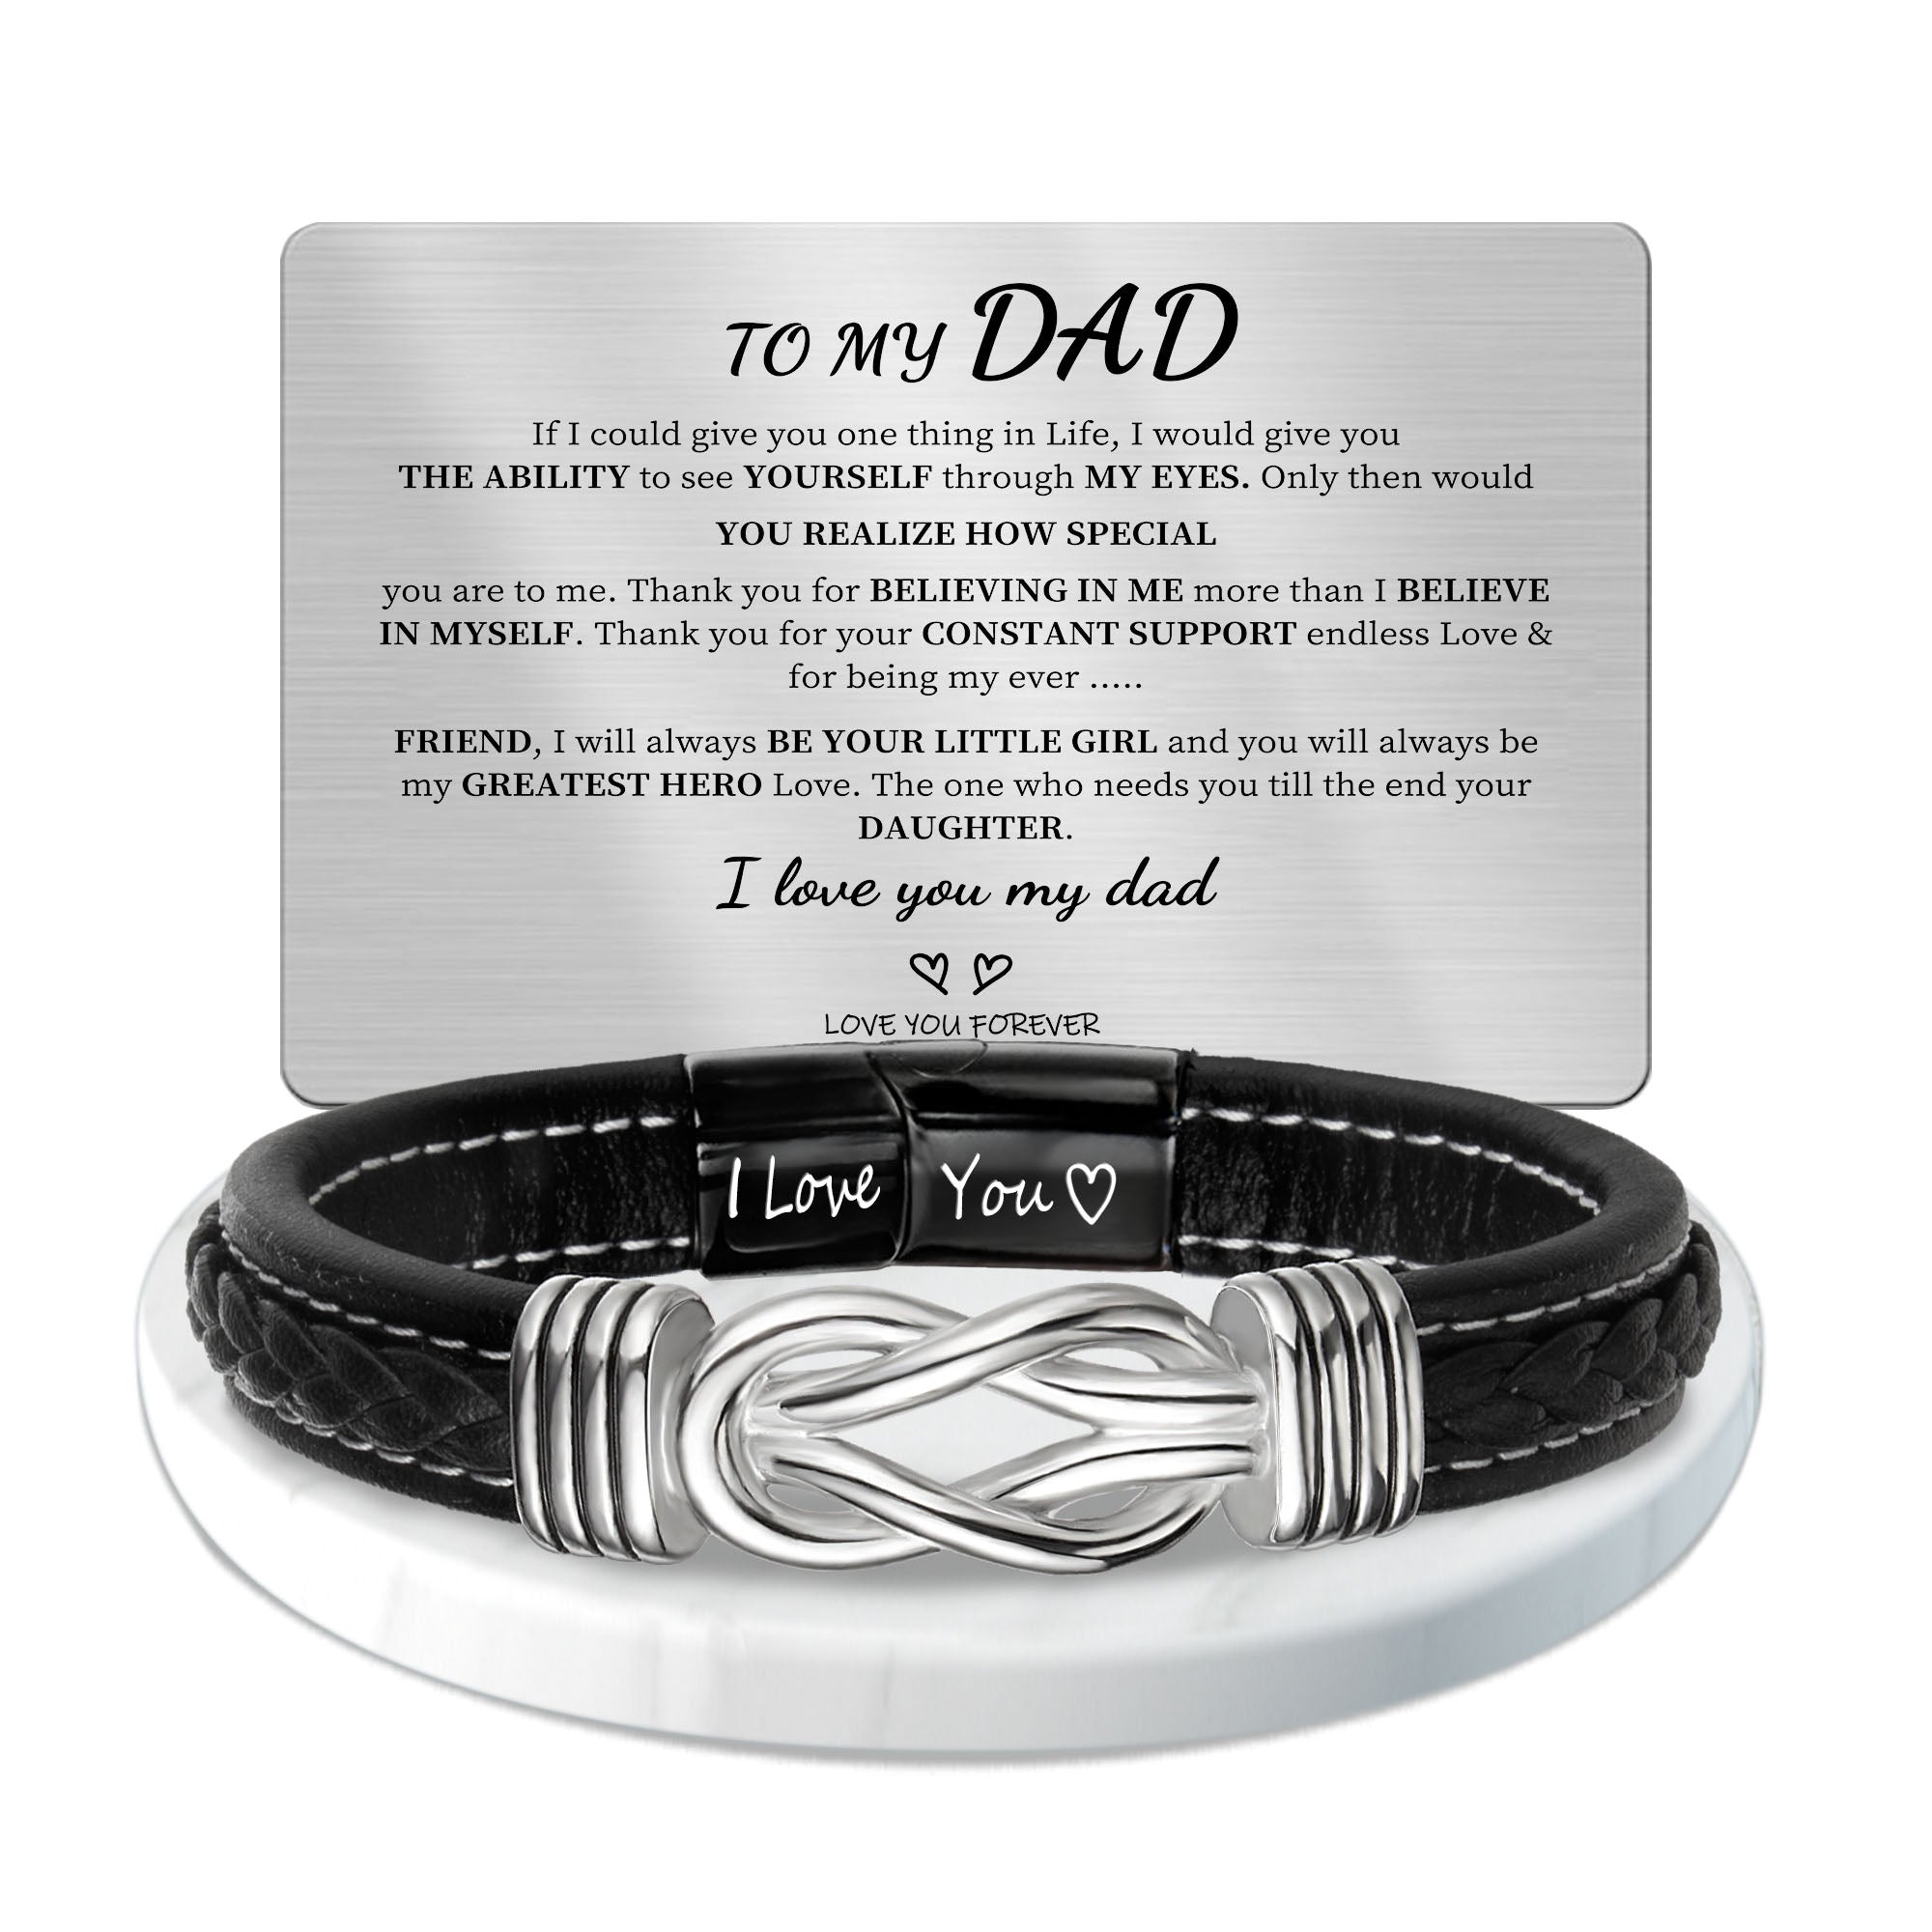 1 / To Dad / 9 inch